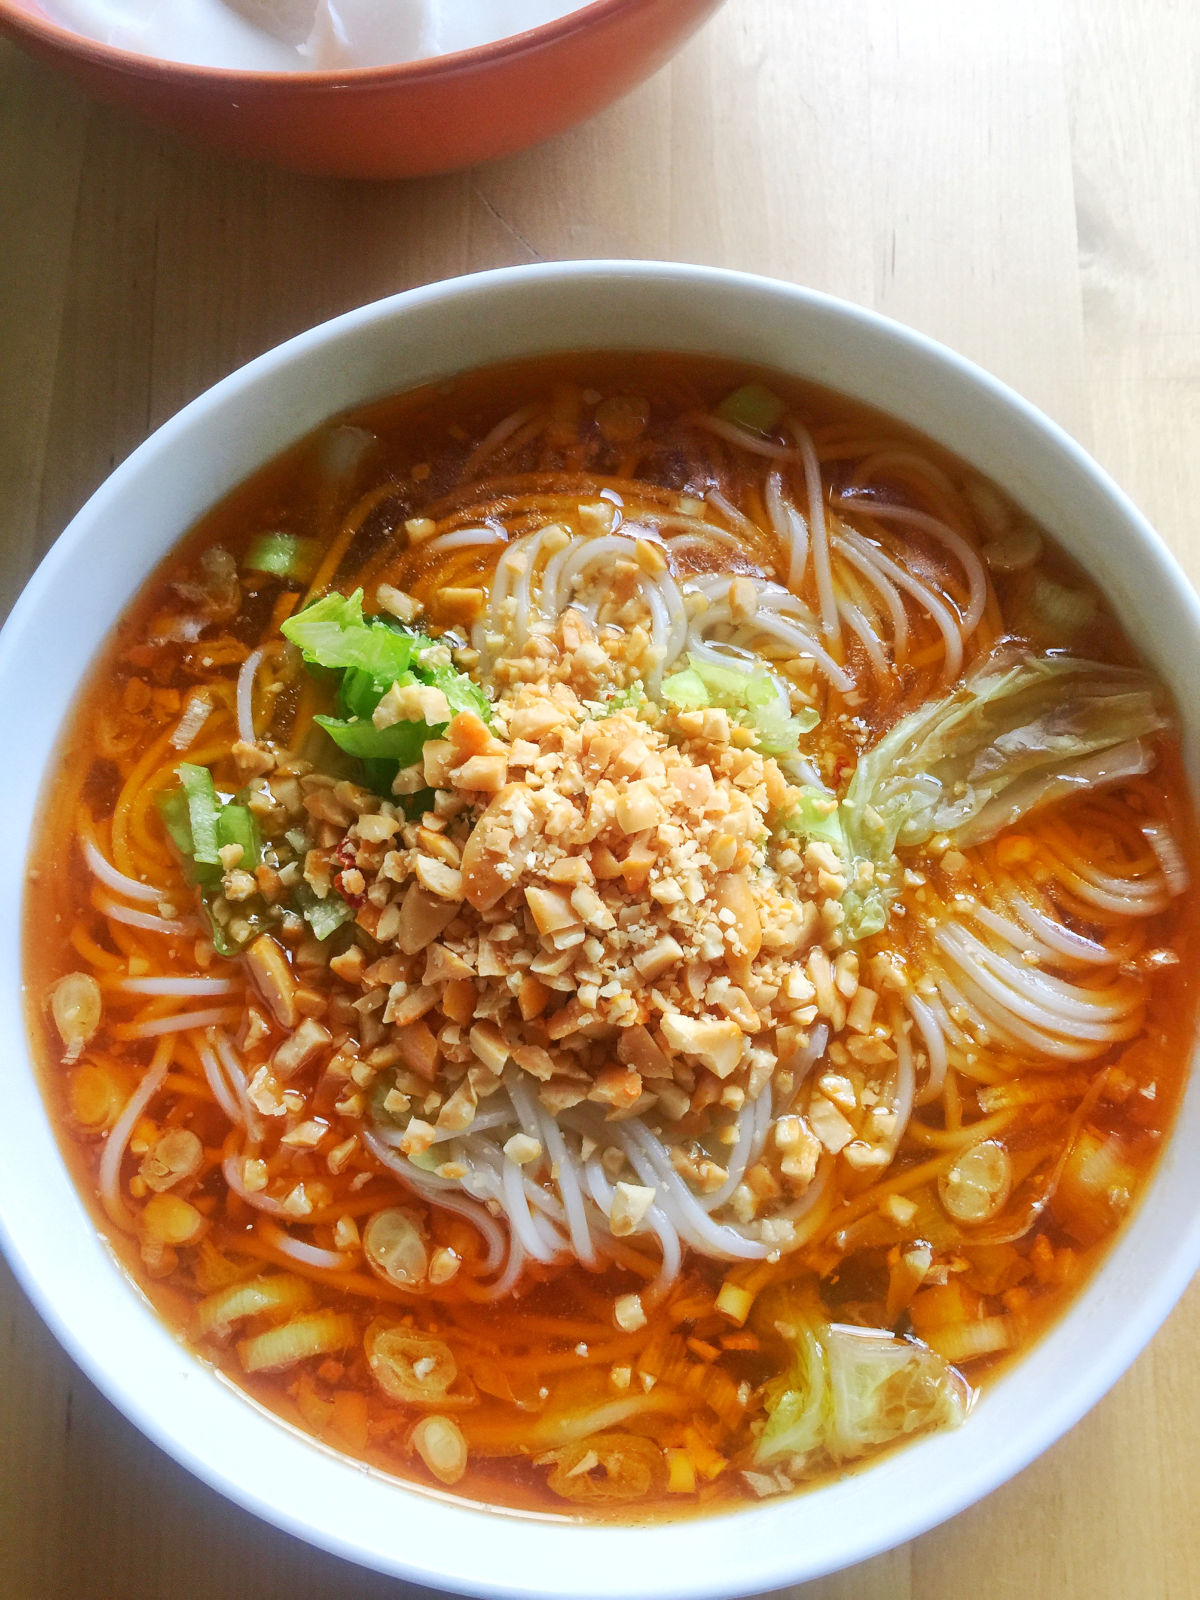 Overhead view of a white bowl of Chongqing noodle soup topped with crushed peanuts next to the lard placed in an orange bowl.